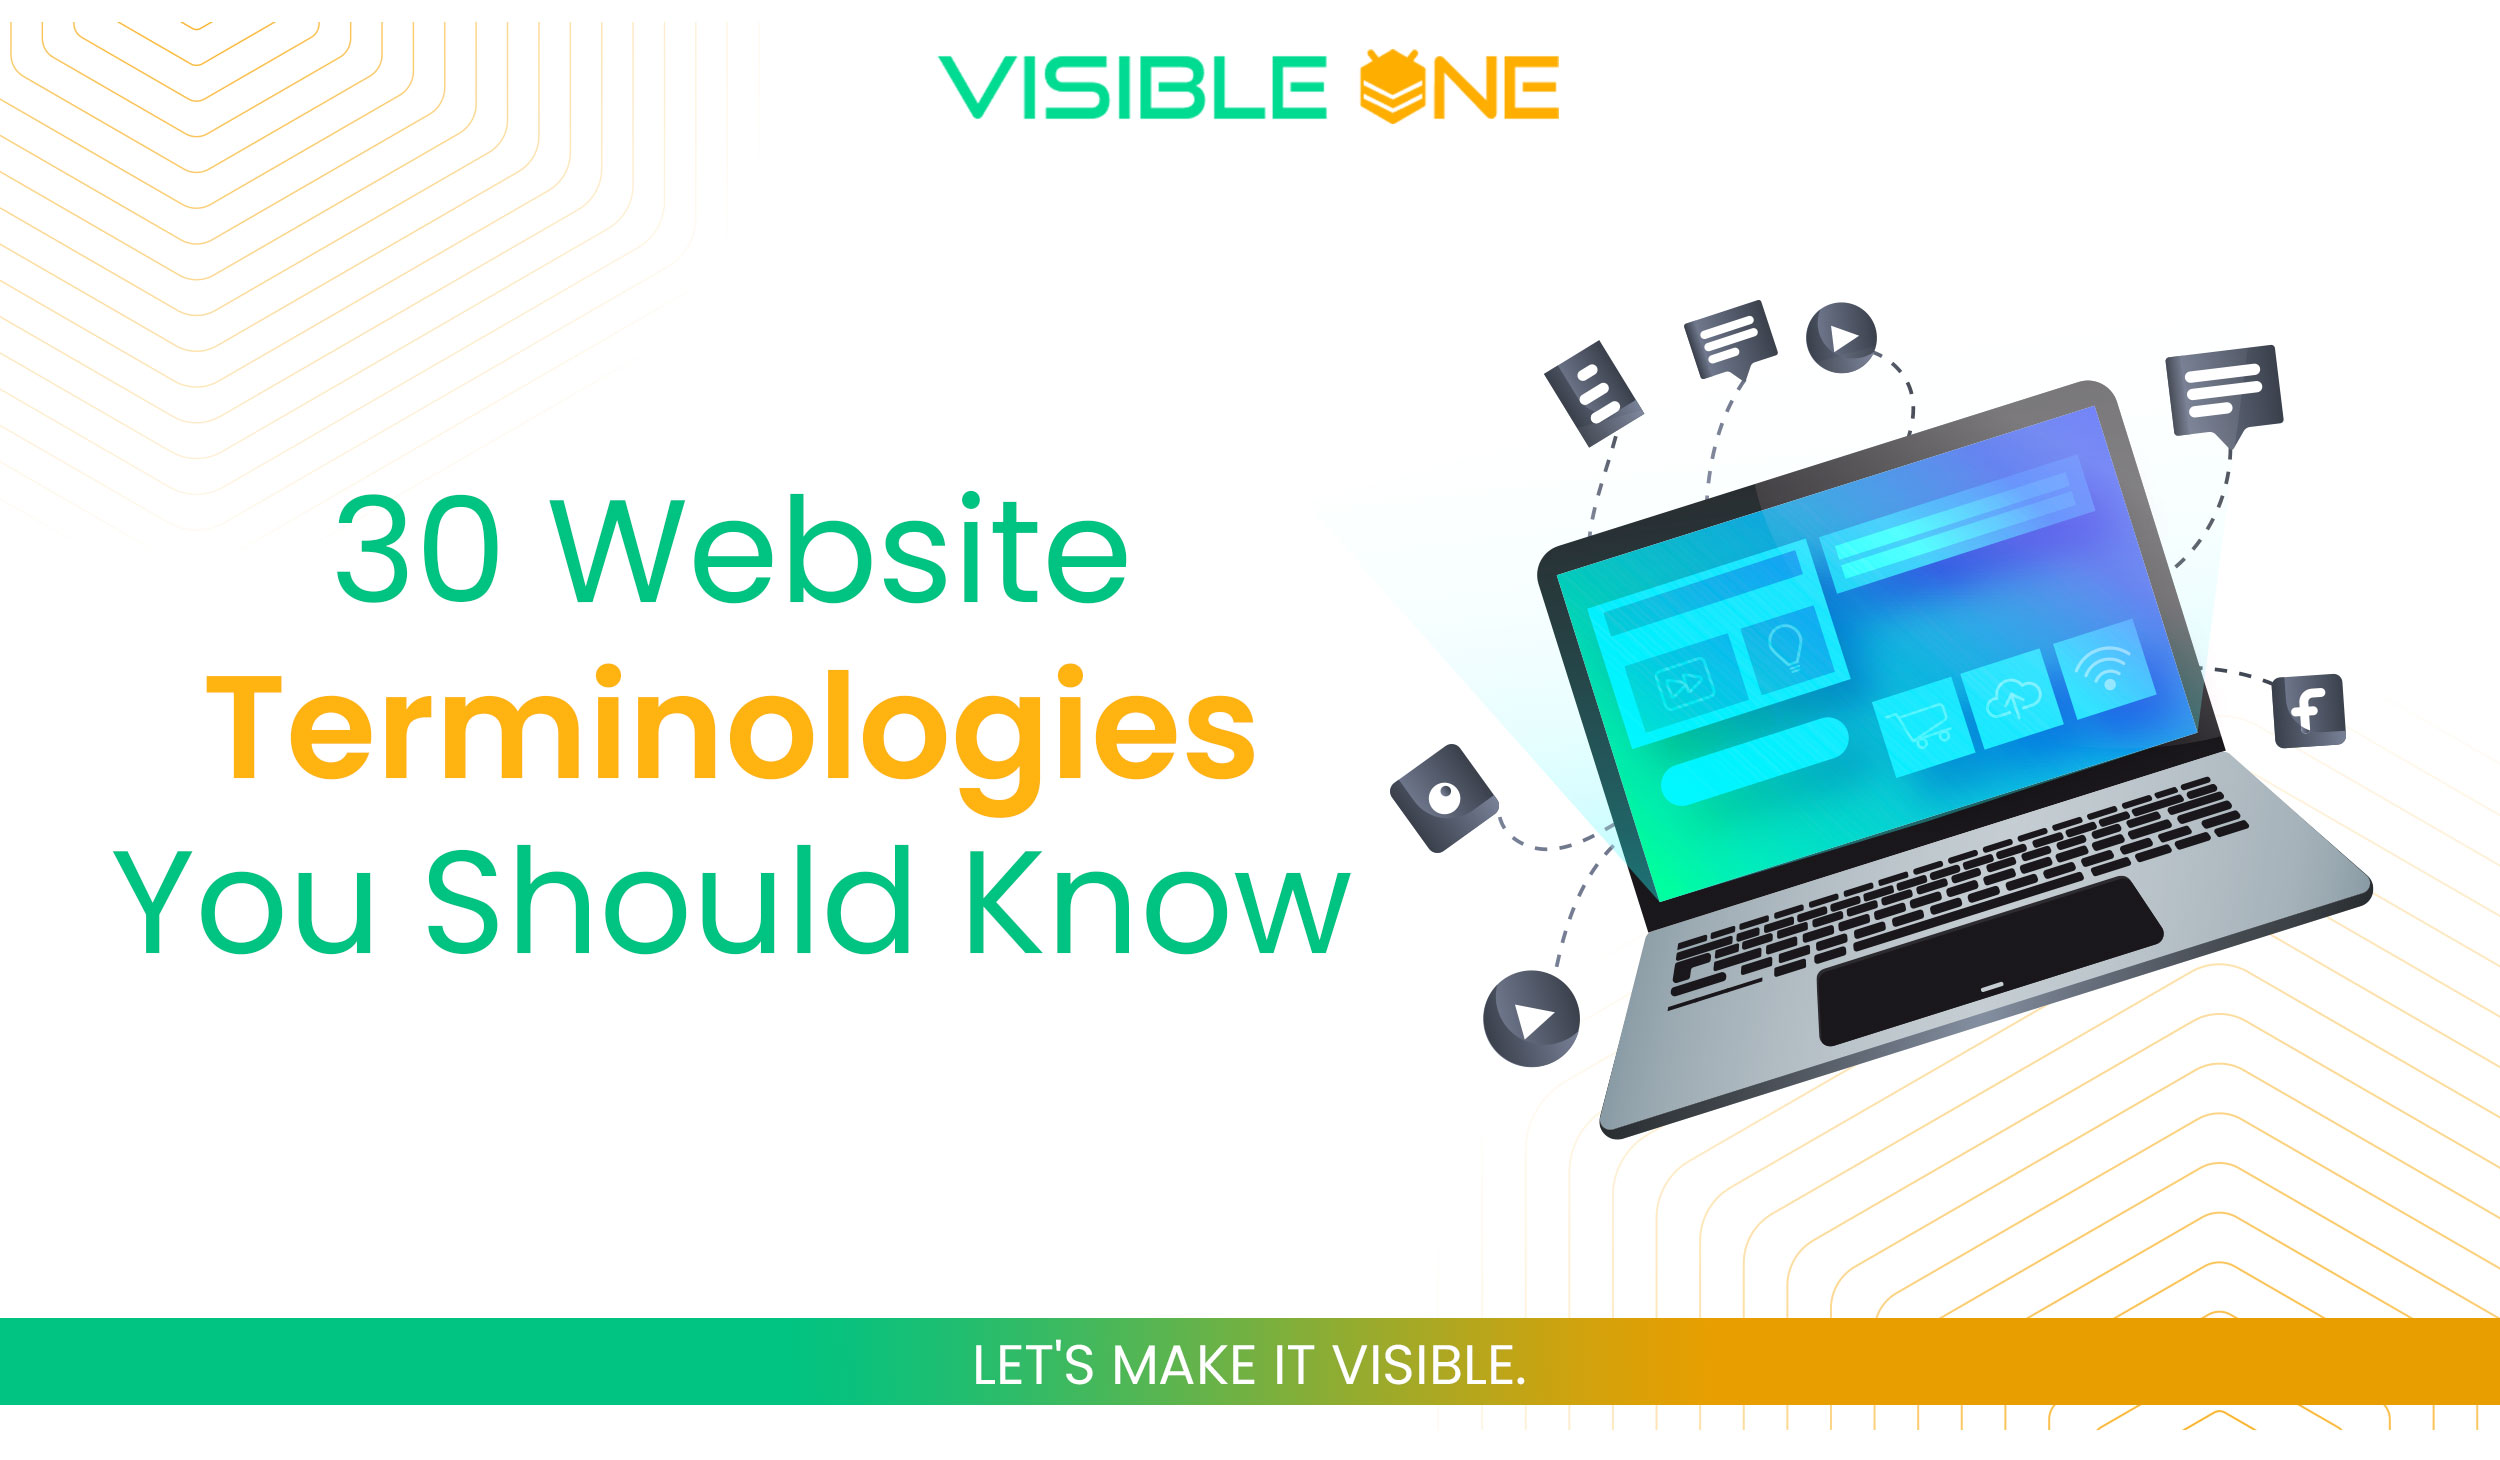 30 Websites Terminologies You Should Know